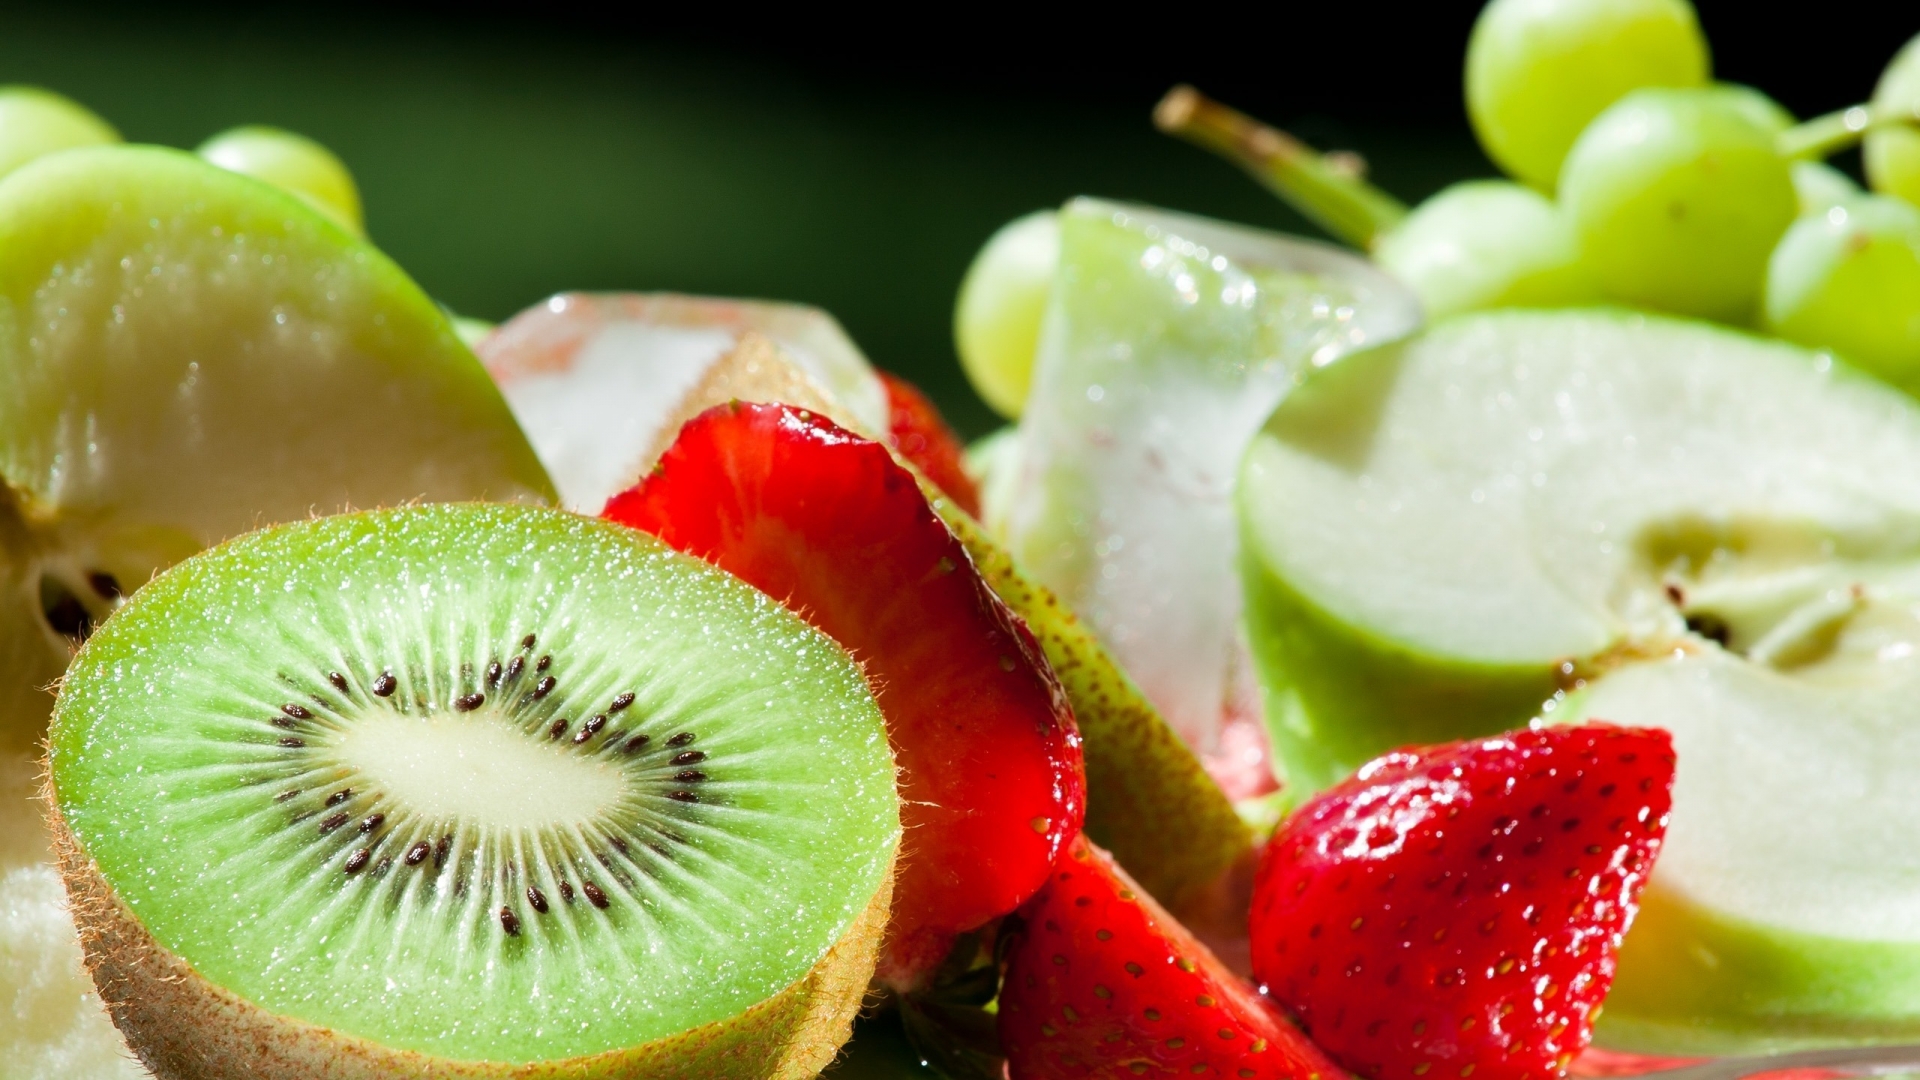 Only Fresh Fruits for 1920 x 1080 HDTV 1080p resolution